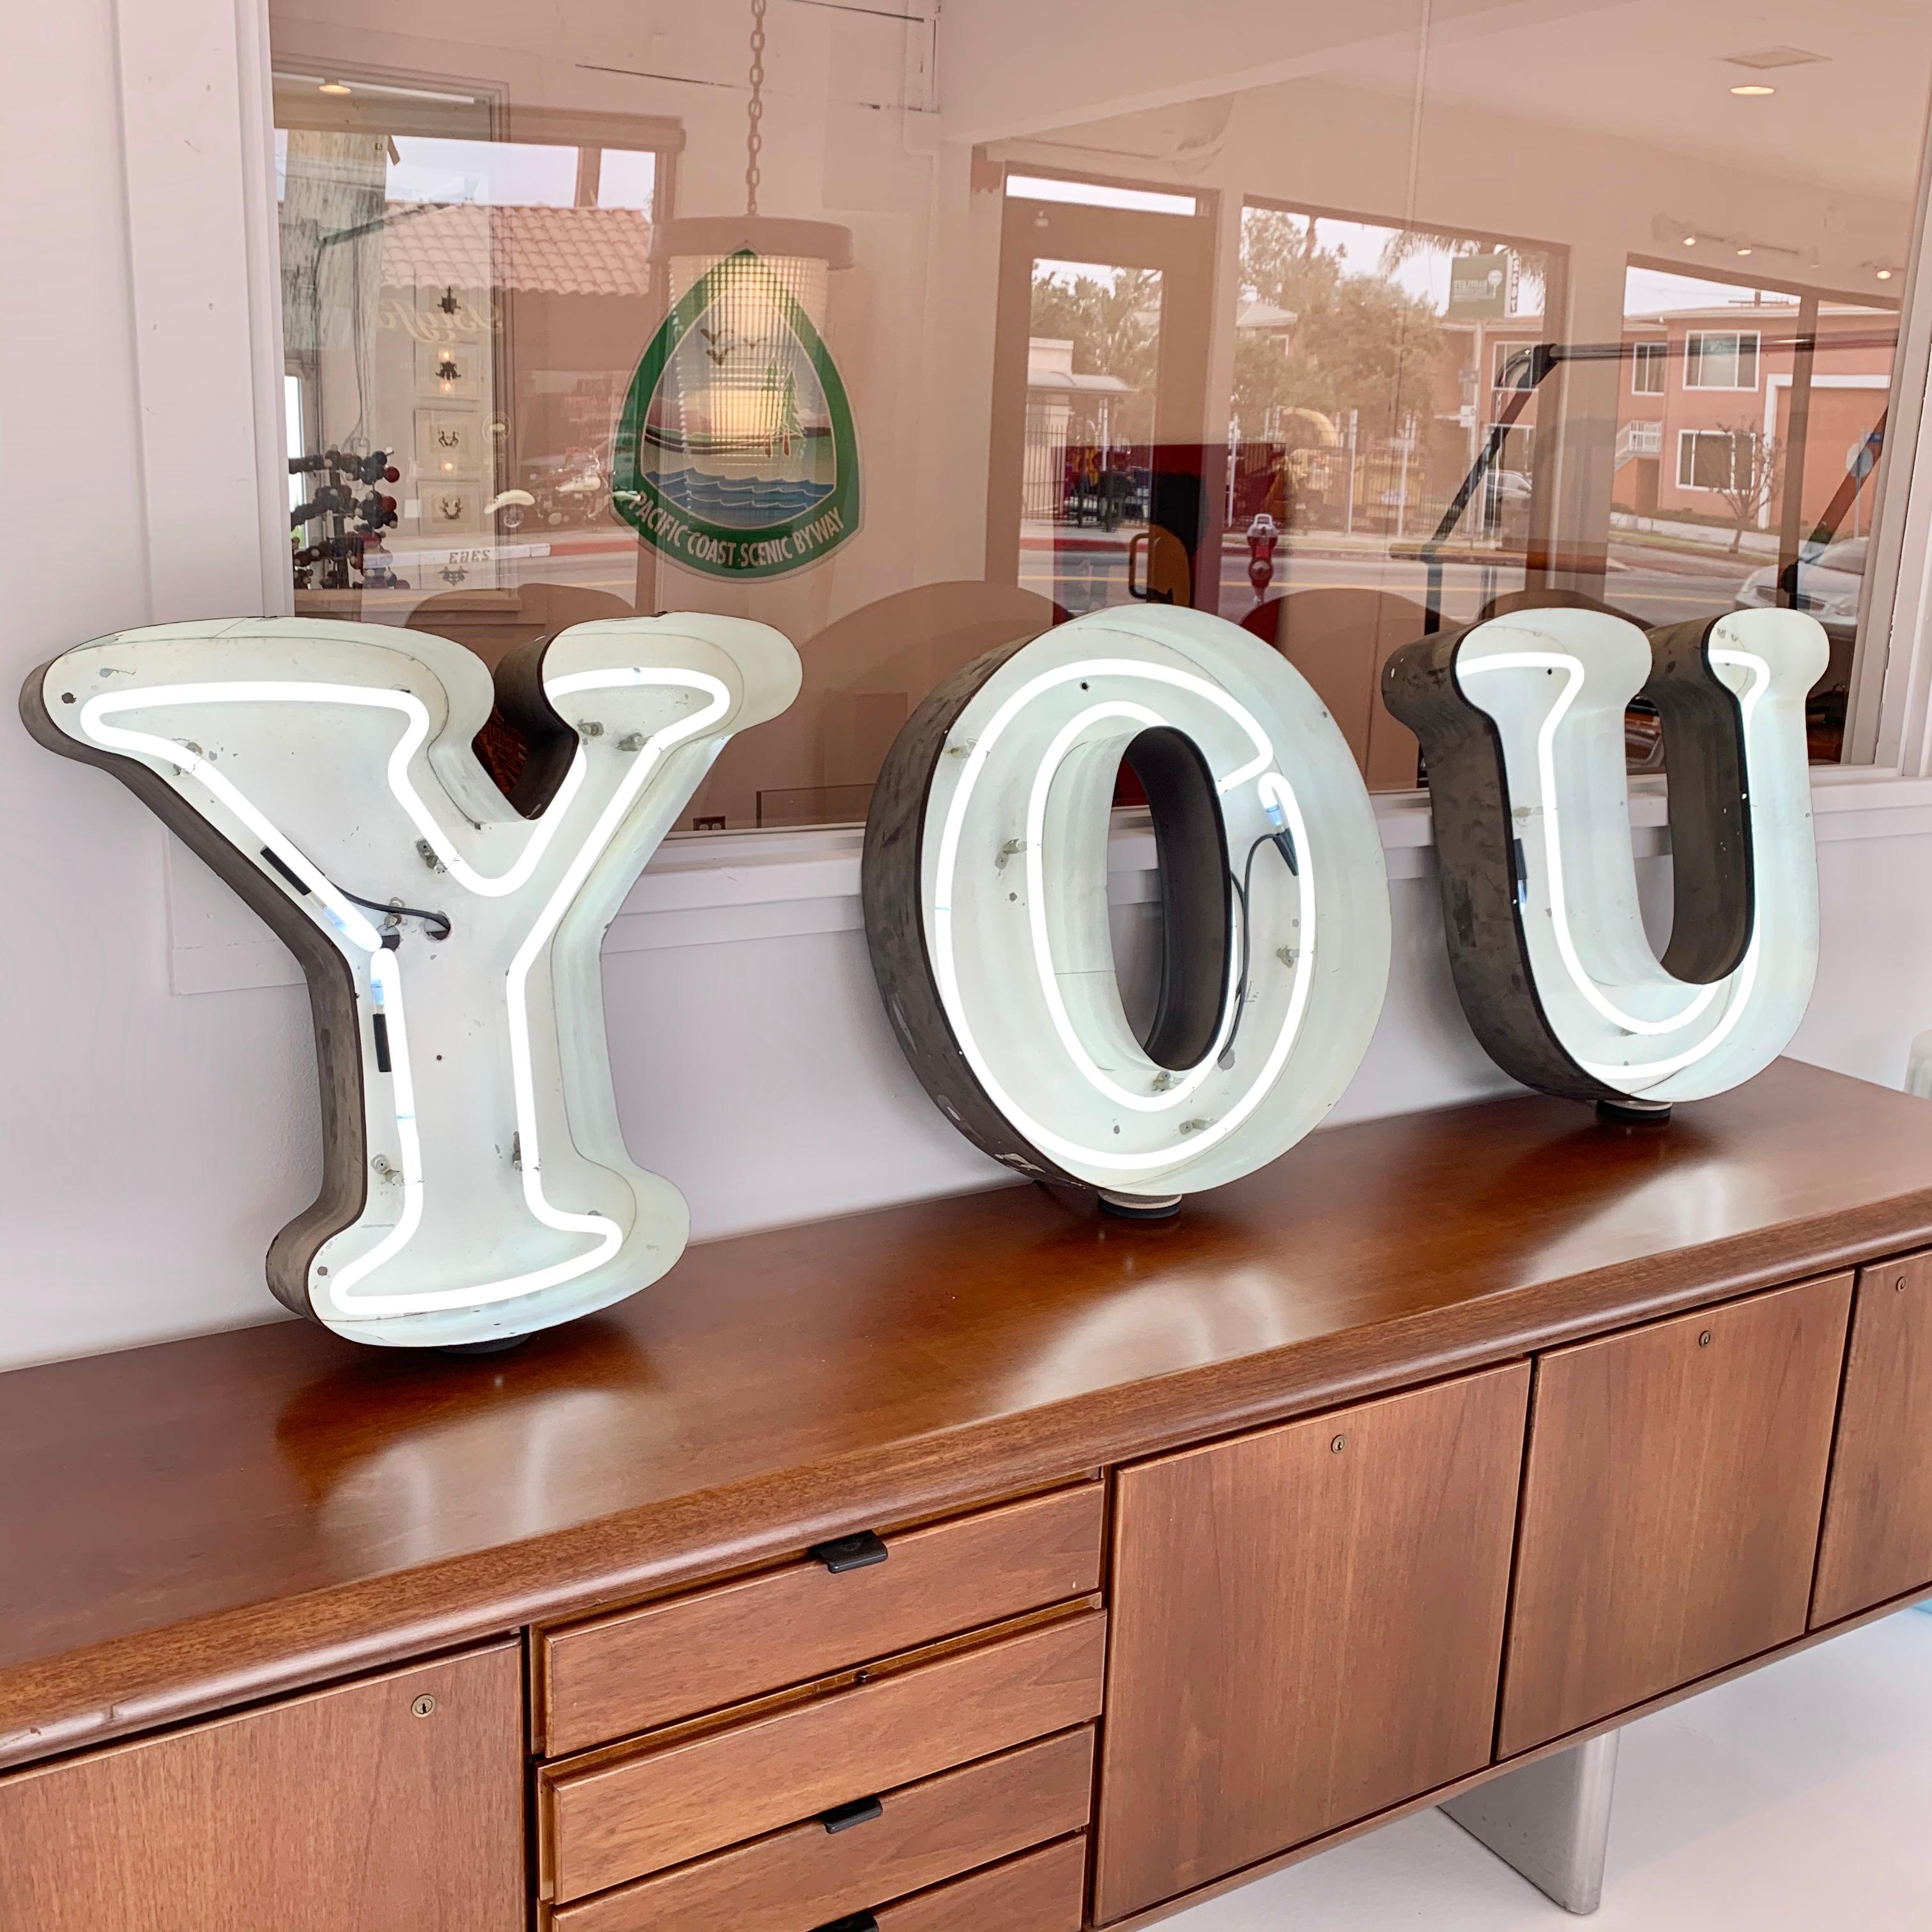 Vintage neon sign, spelling Y - O - U. handcut metal channel letters with hand bent neon glass. Just over 6 feet long when lined up horizontally. Double row of neon inside each letter. Black letters with white inside. All newly rewired, and newly